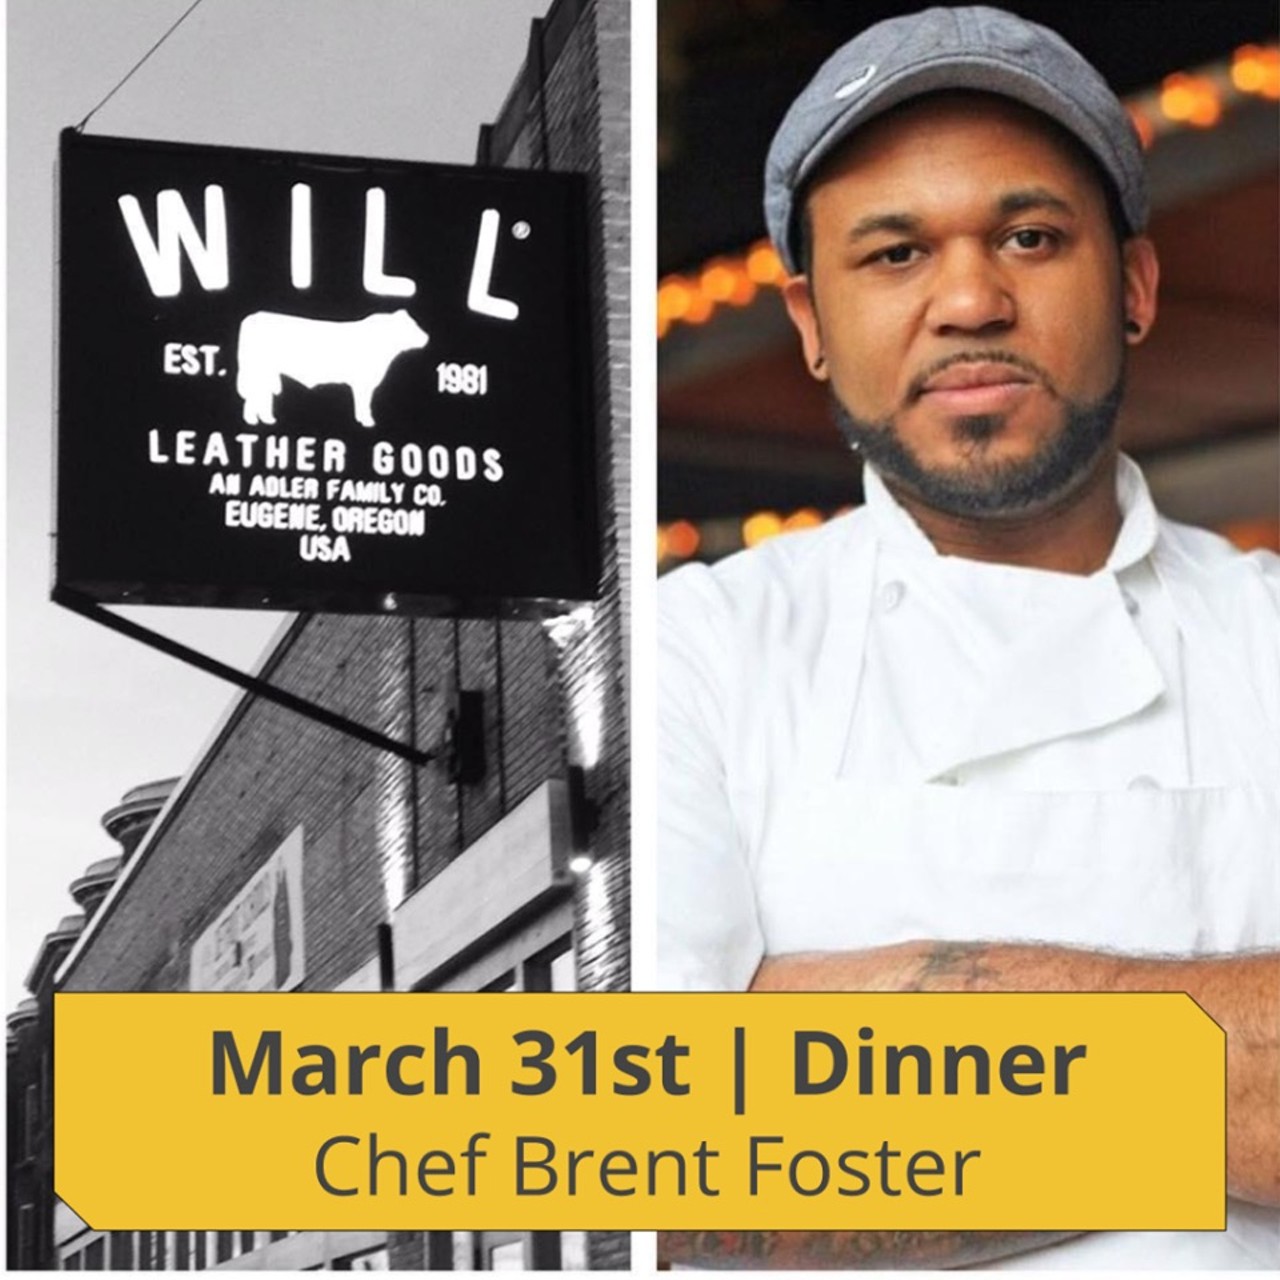 Thursday, 3/31
Dinner with Brent Foster
@ Will Leather Goods
Midtown&#146;s leather goods shop will venture into the dining industry, with pop-up restaurateur Brent Foster providing the menu for the one-night event. The chef is known for creating dishes based on books, movies, and pop-culture, like the Dr. Seuss-themed brunch he put together for Revolver back in 2013. Will Leather Goods will be hosting the hefty, yet delicious five-course dinner, and various packages are available ranging from $60 to $162. Along with admission, guests will also receive 15 percent off everything inside the shop.
Doors open at 7 p.m.; 4120 Second Ave., Detroit; 313-309-7892; app.gopassage.com; tickets start at $60.